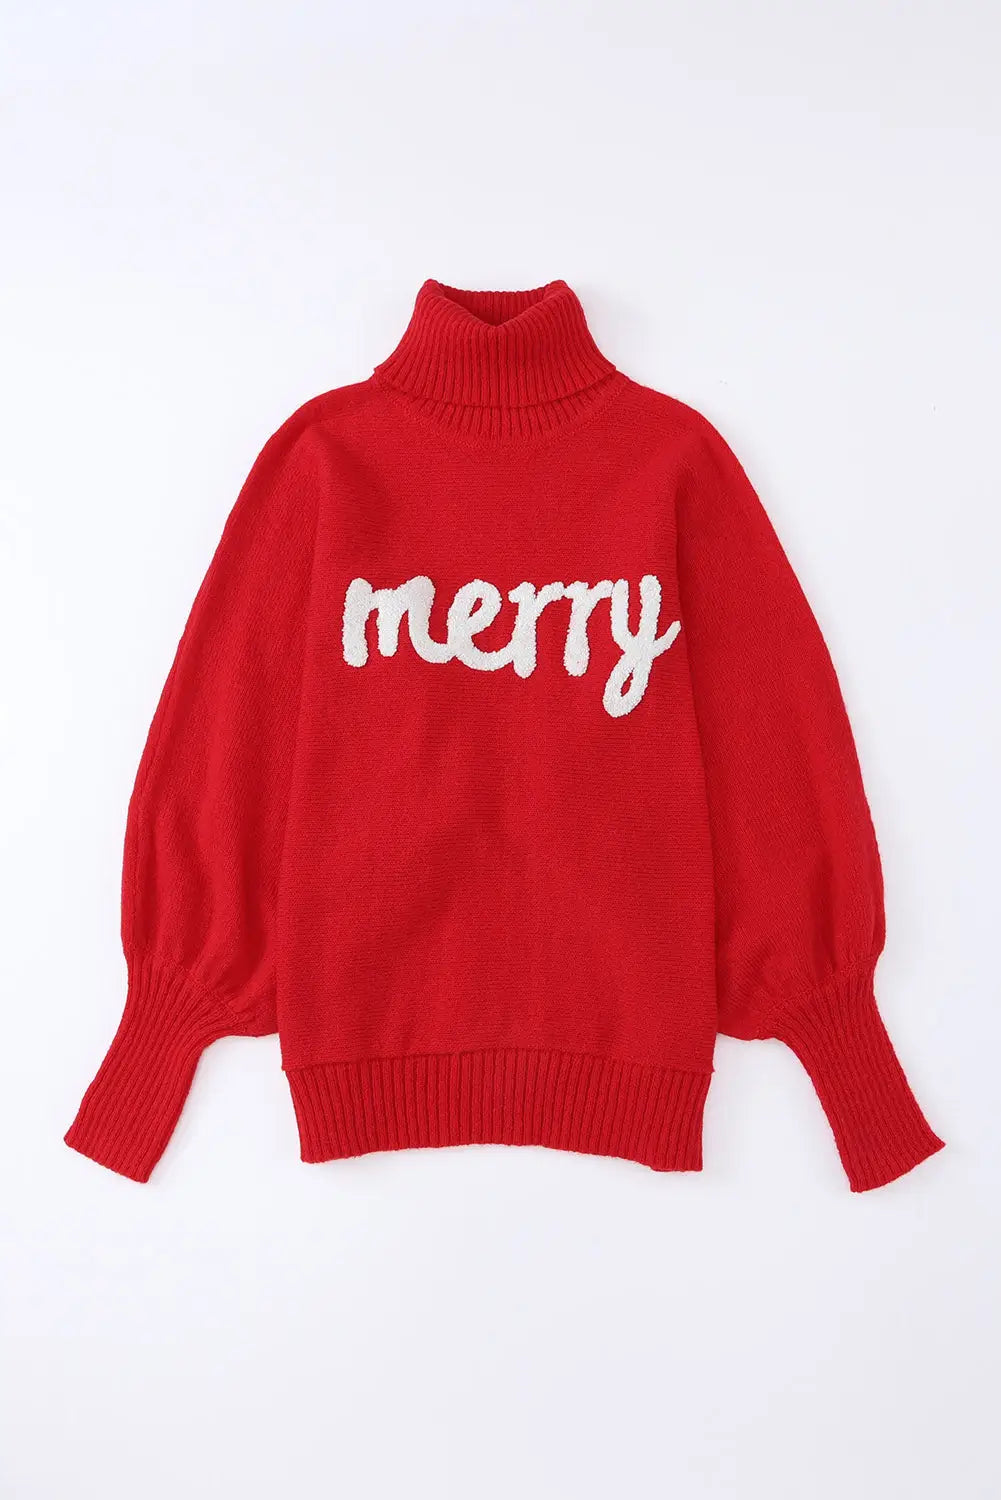 Racing red valentine love letter embroidered high neck sweater - tops